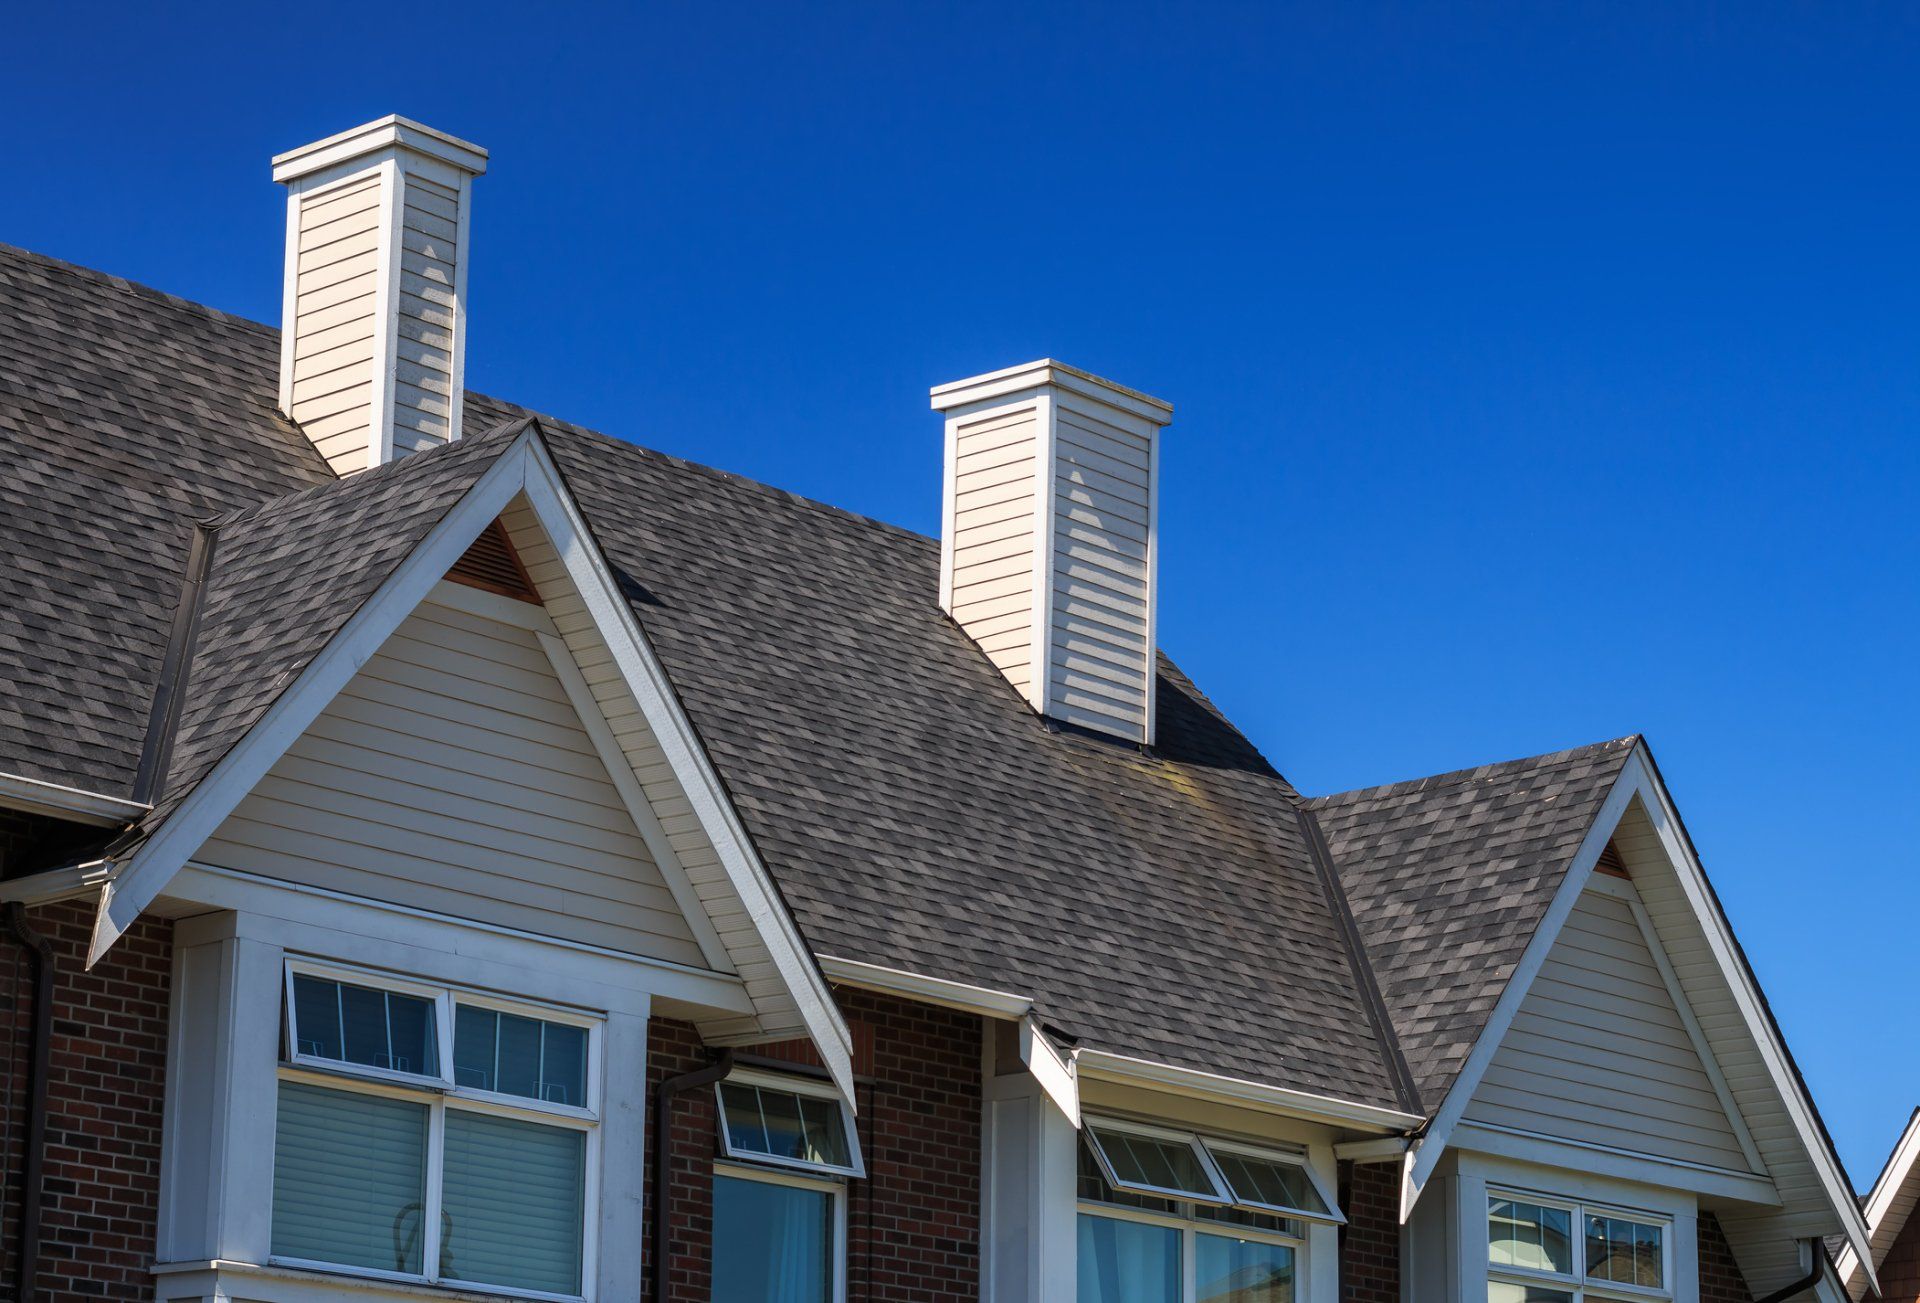 Residential Shingle Roof - Service Roofing Co. - Fullerton, CA